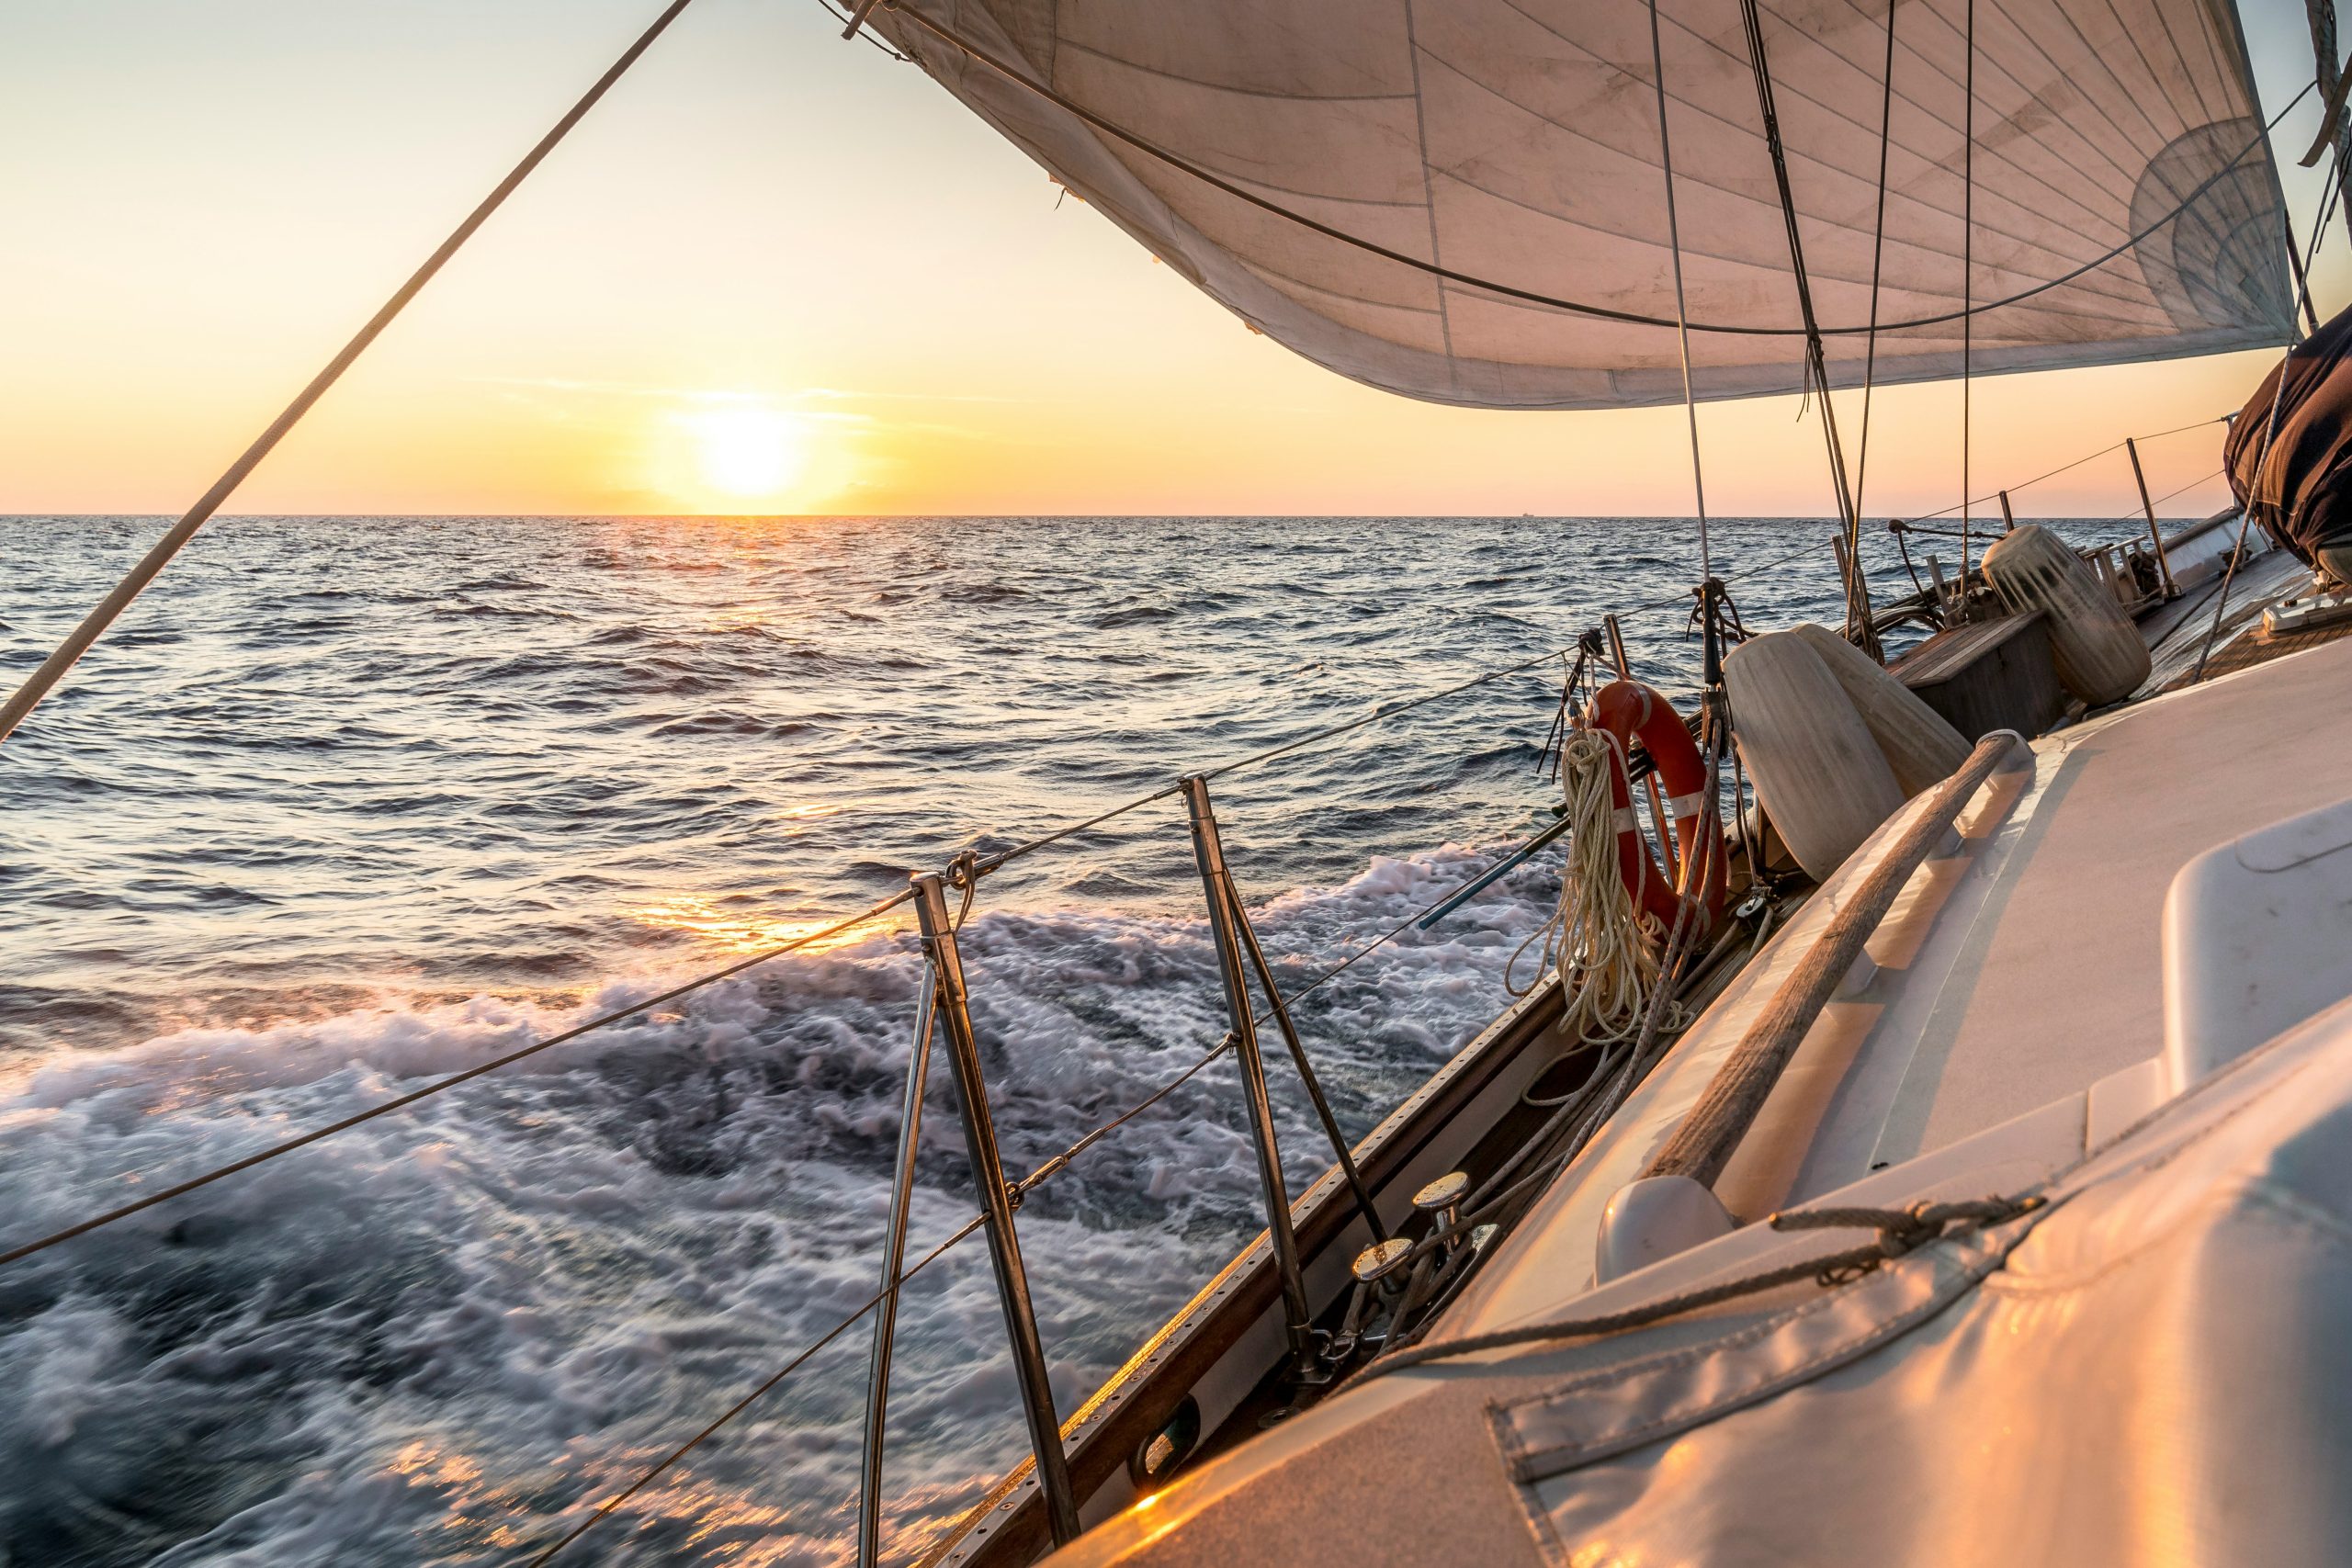 explore the exhilarating world of sailing with our comprehensive guides, tips, and resources. discover the joy of sailing and experience the freedom of the open sea.